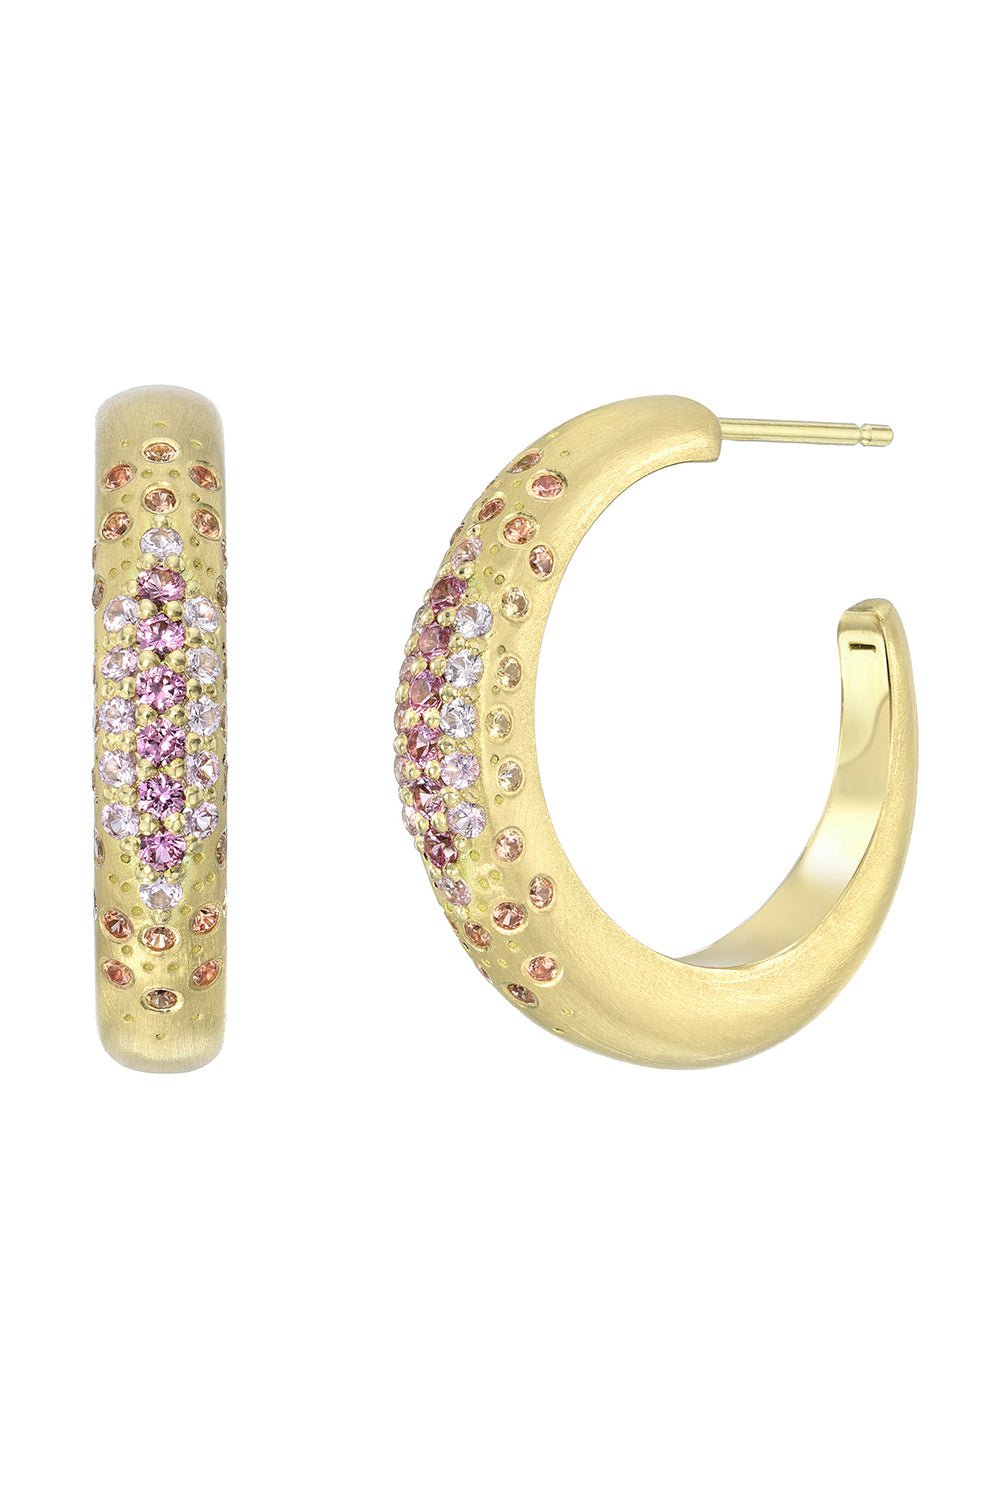 MEREDITH YOUNG-Sunset Crescent Hoop Earrings-YELLOW GOLD